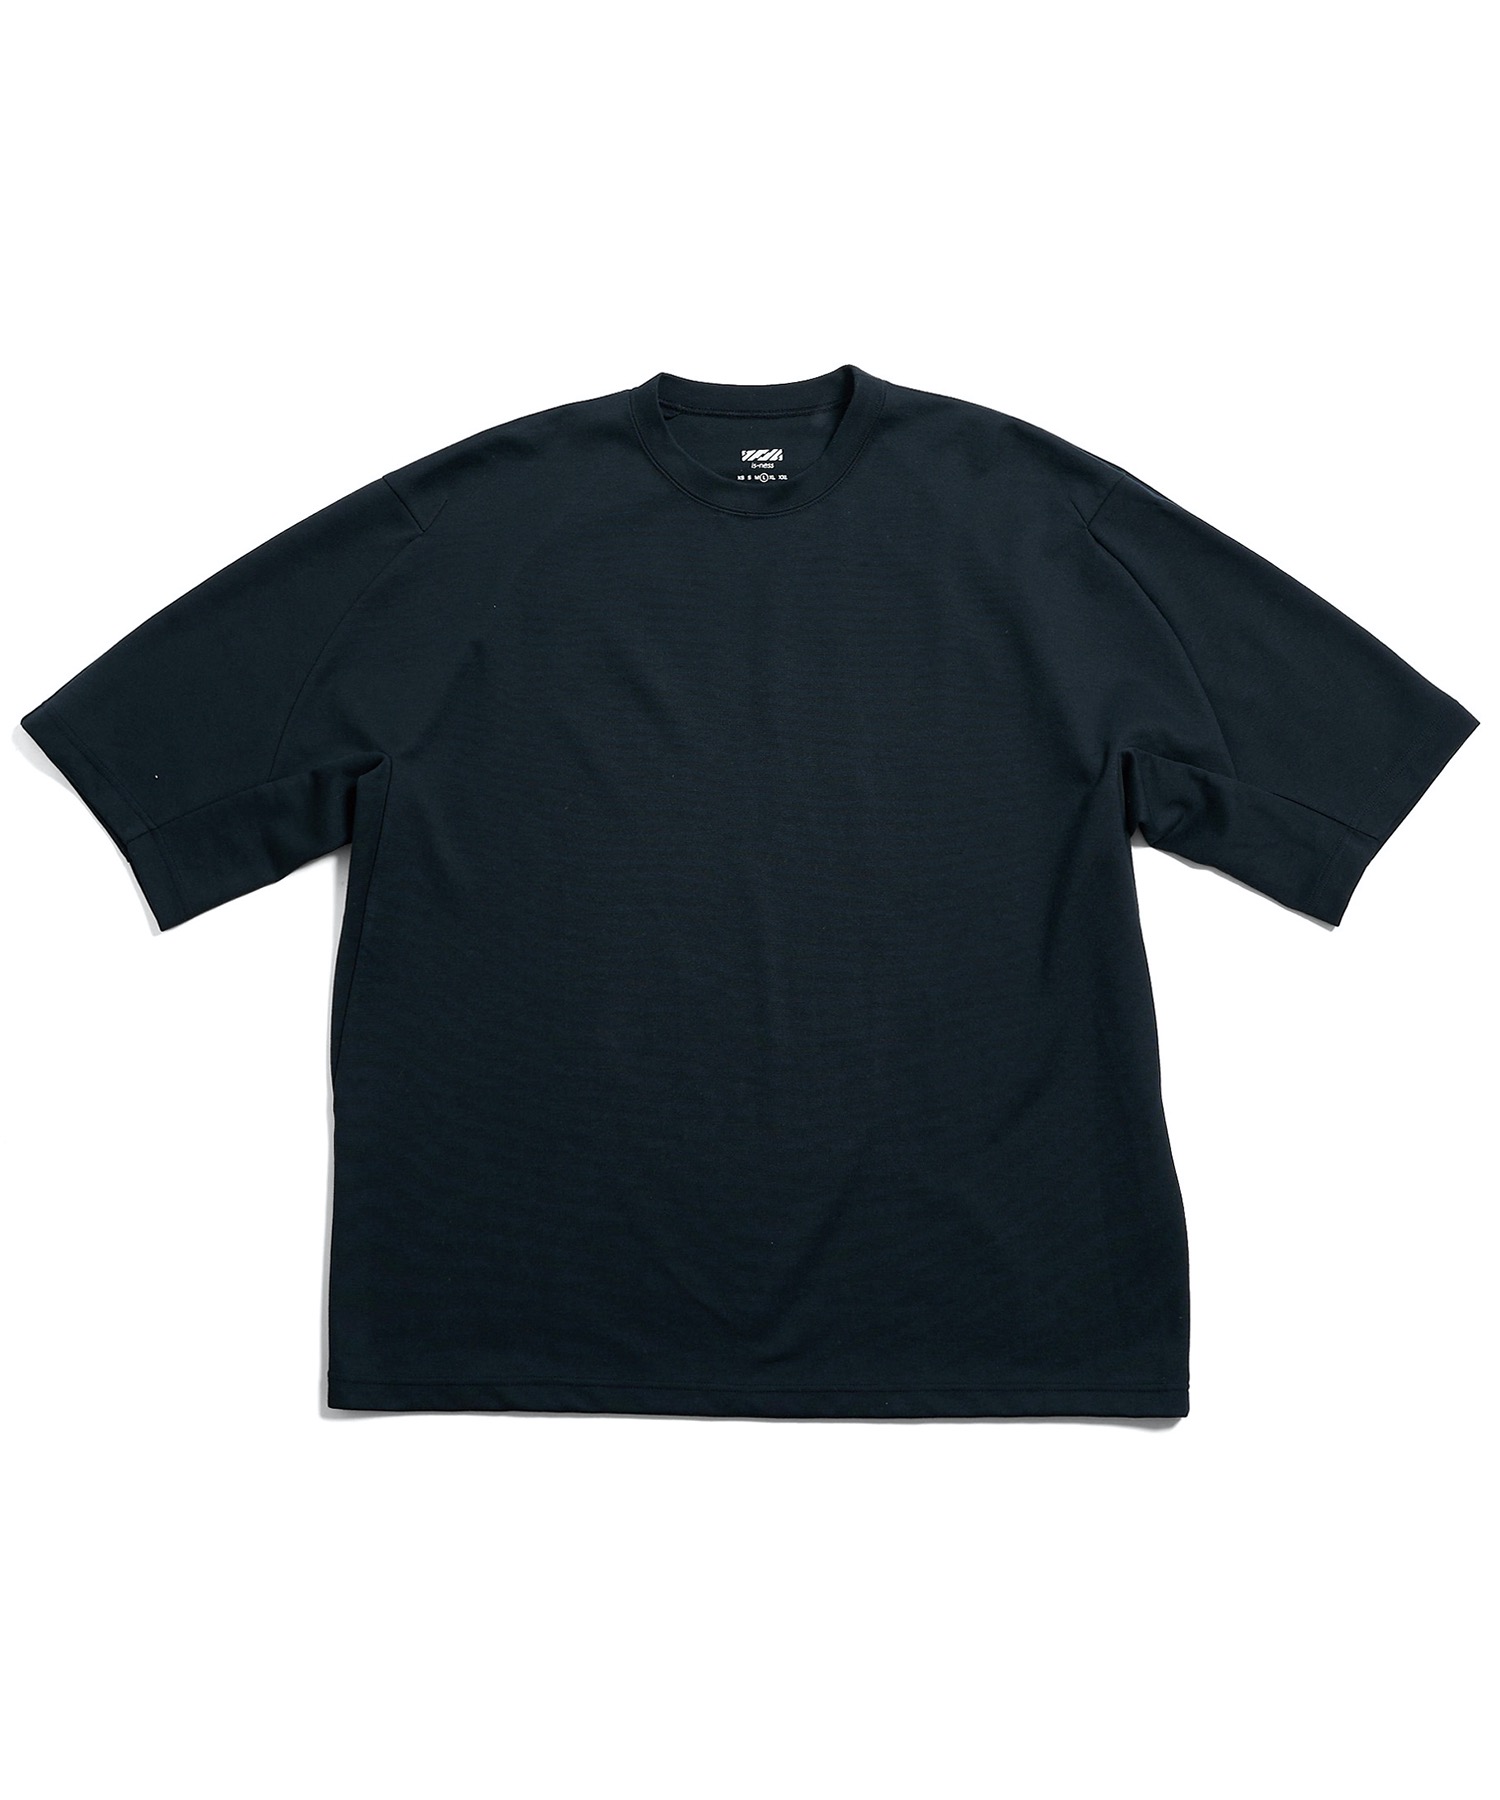 is-nessDJ DRAPING 【65%OFF!】 T-SHIRTS 最大57%OFFクーポン